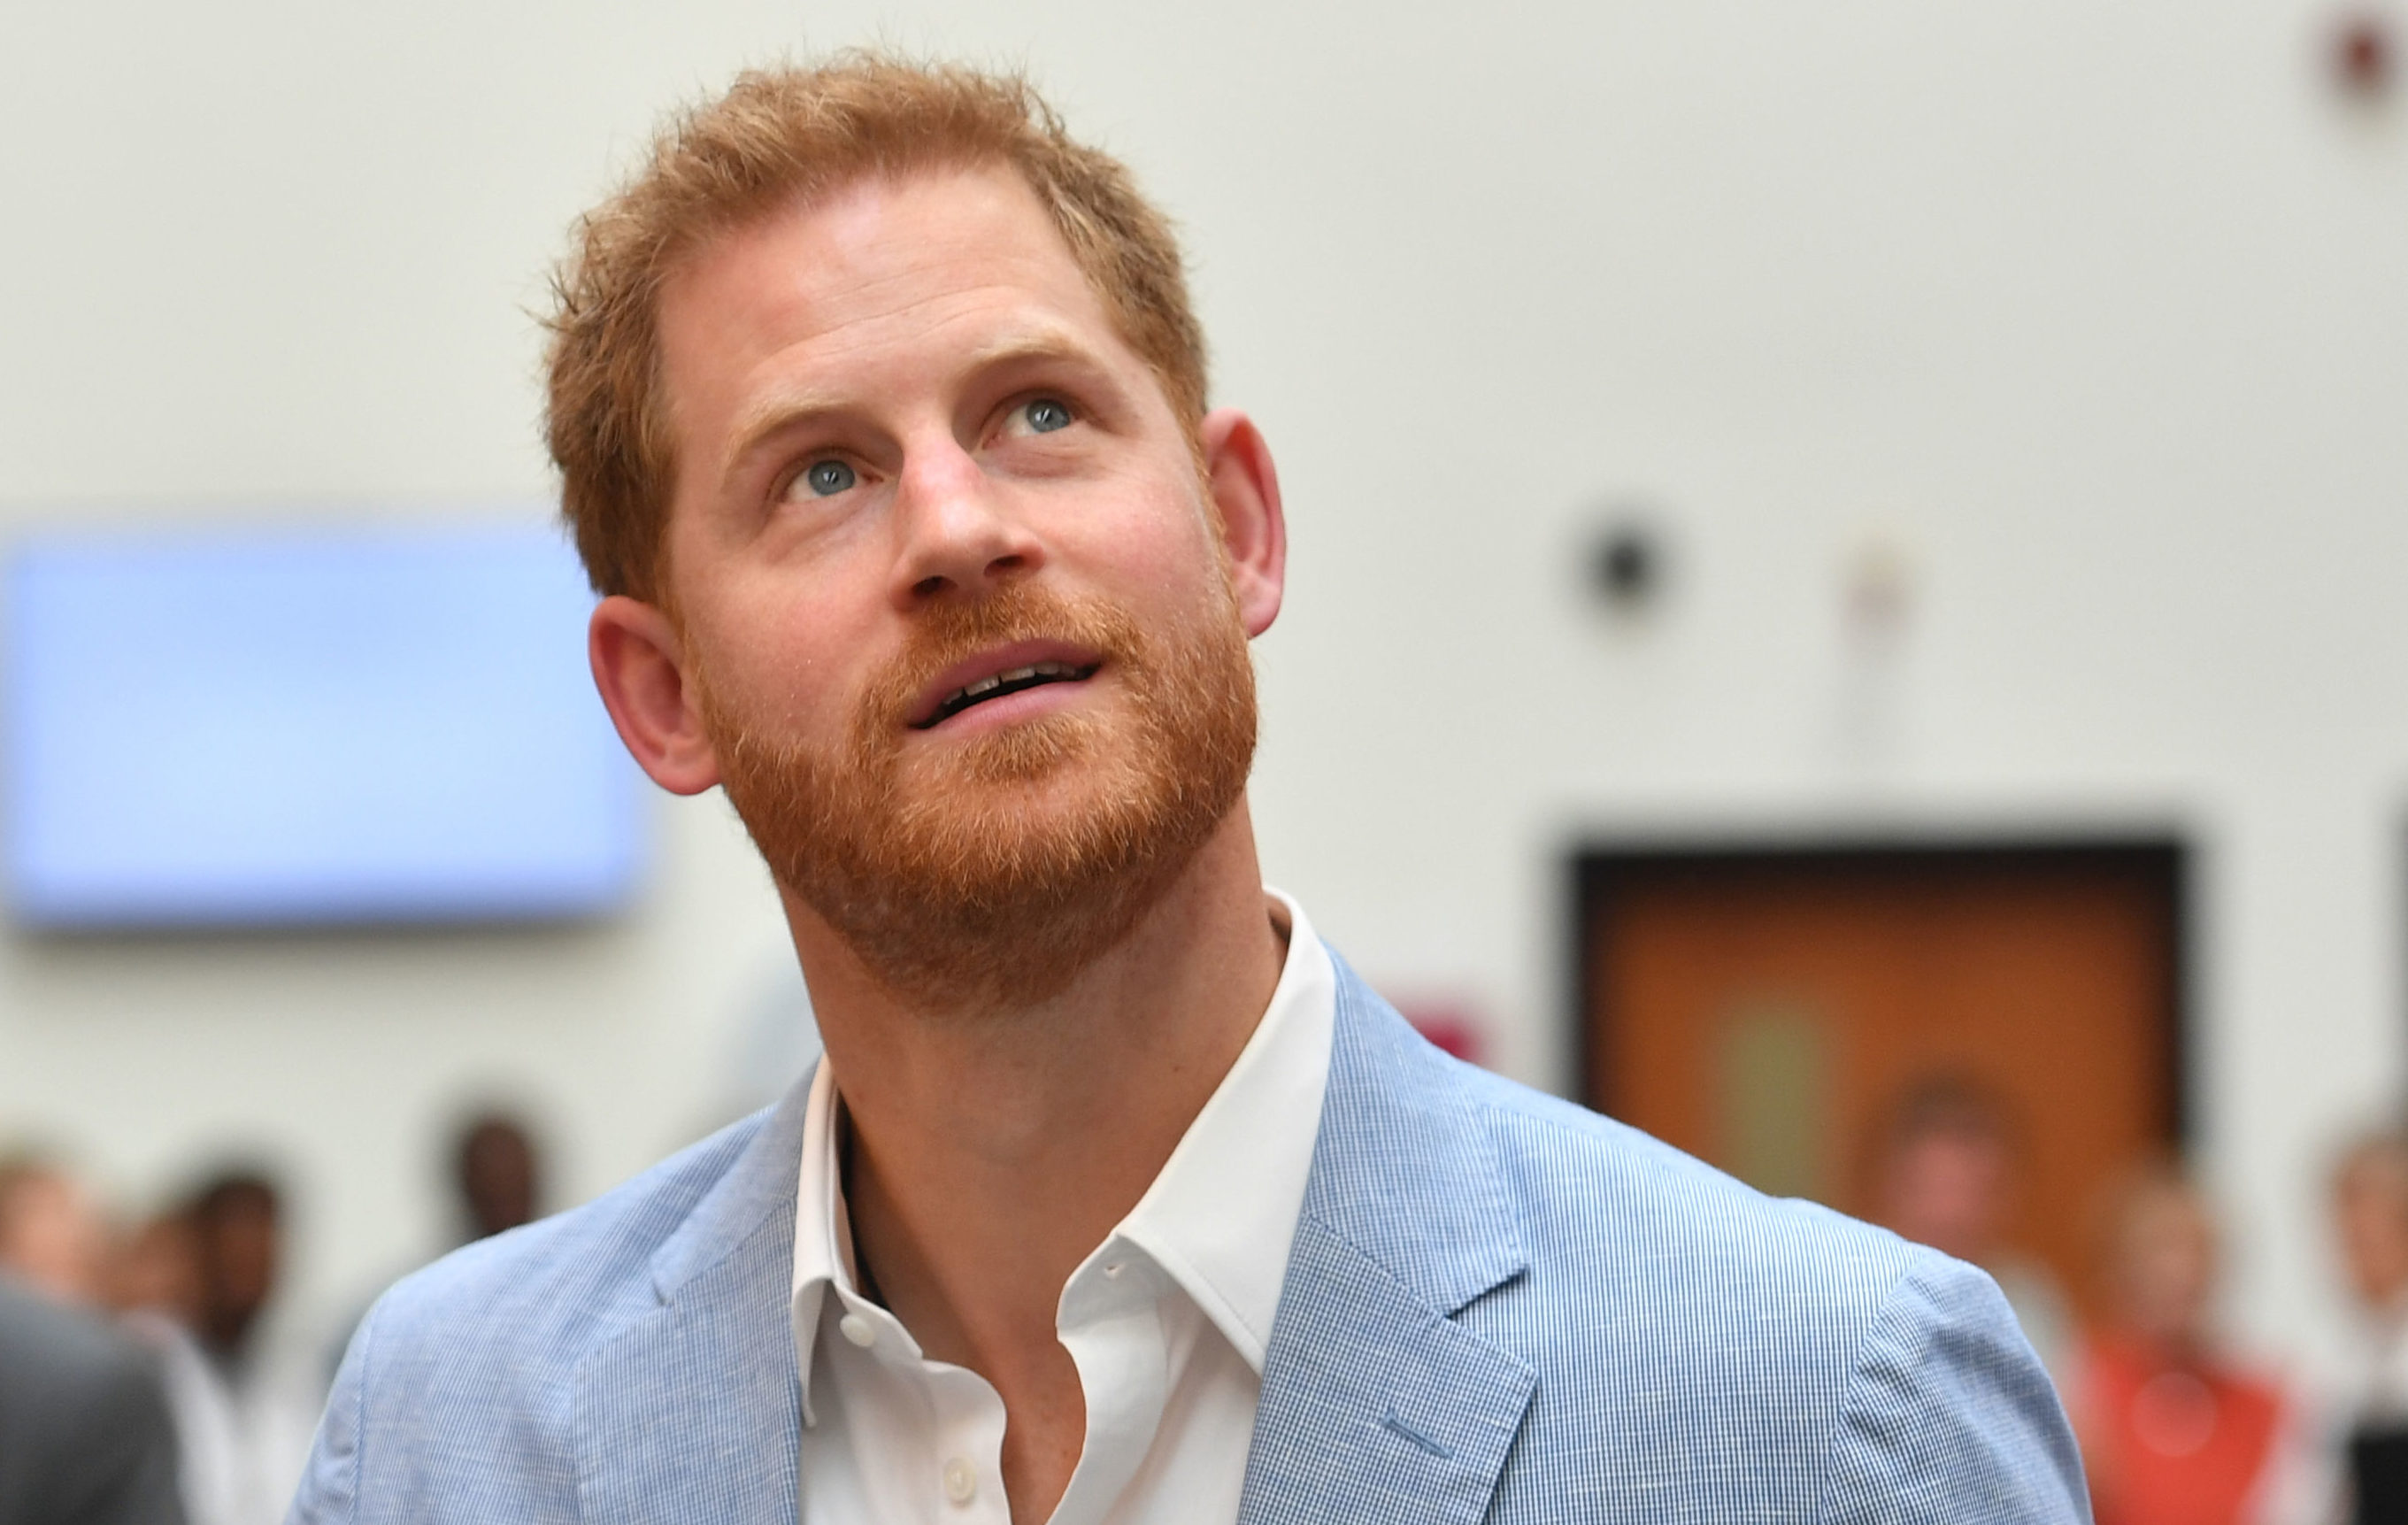 Prince Harry made comments on climate change this week